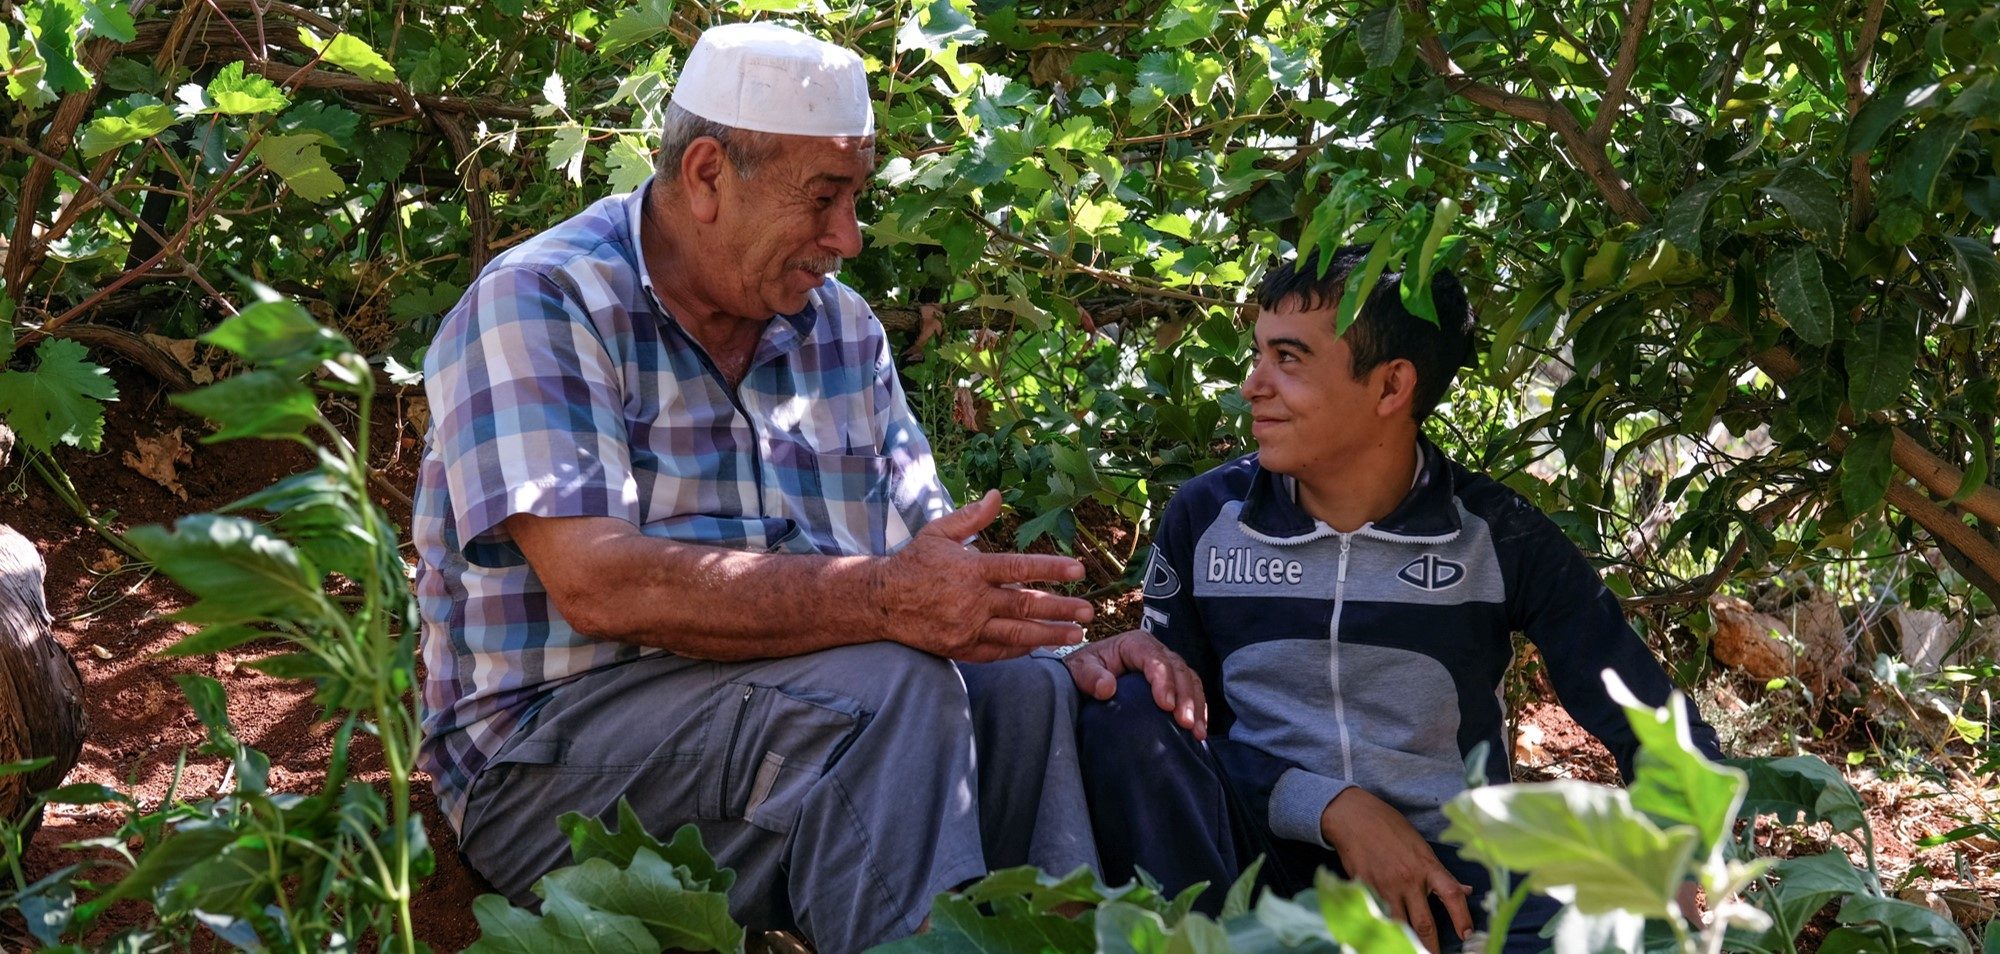 An older man and a younger boy smiling, surrounded by trees